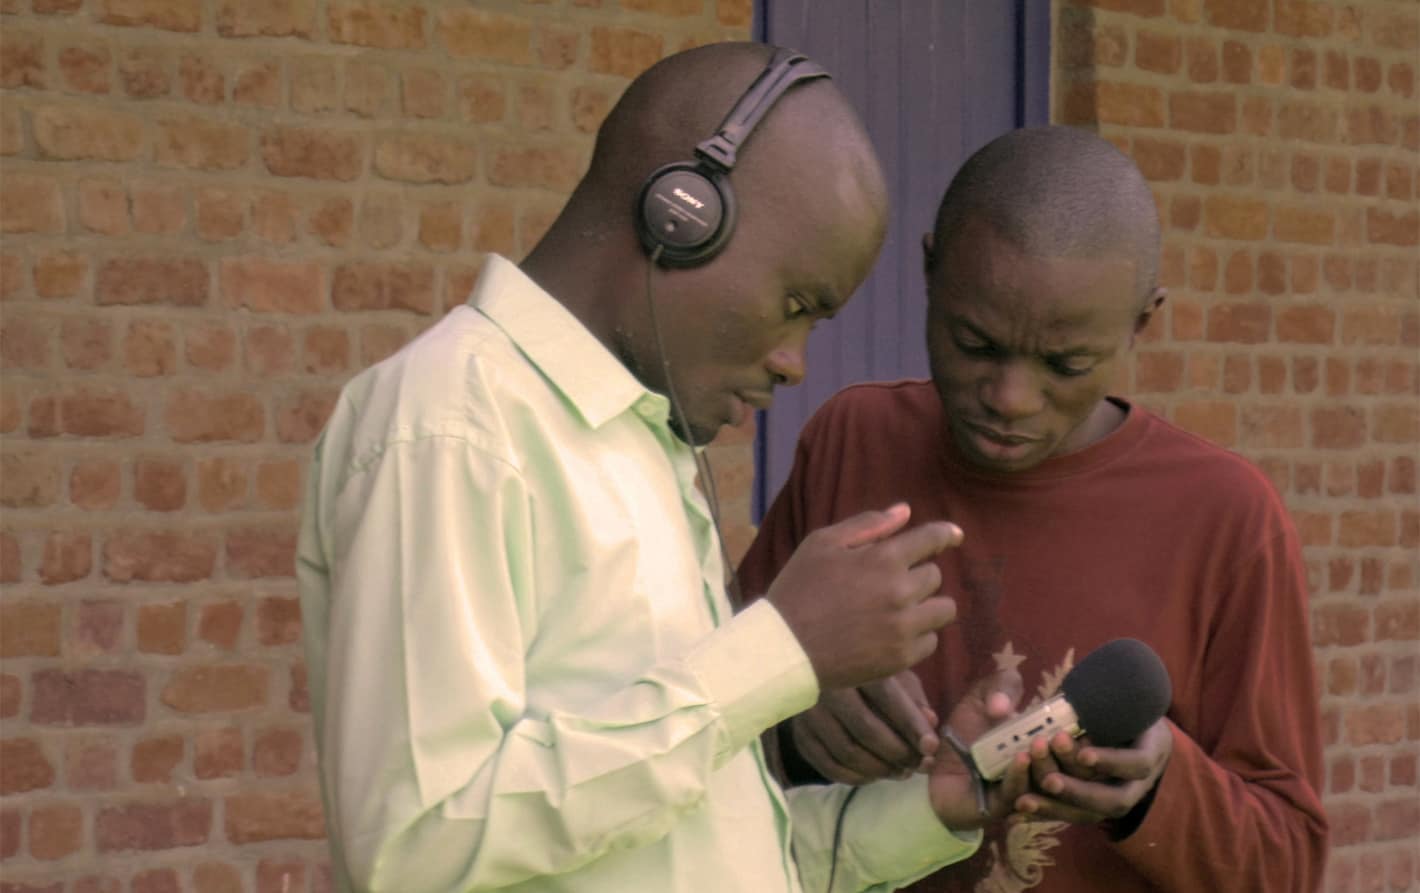 Two men look at an audio recorder.